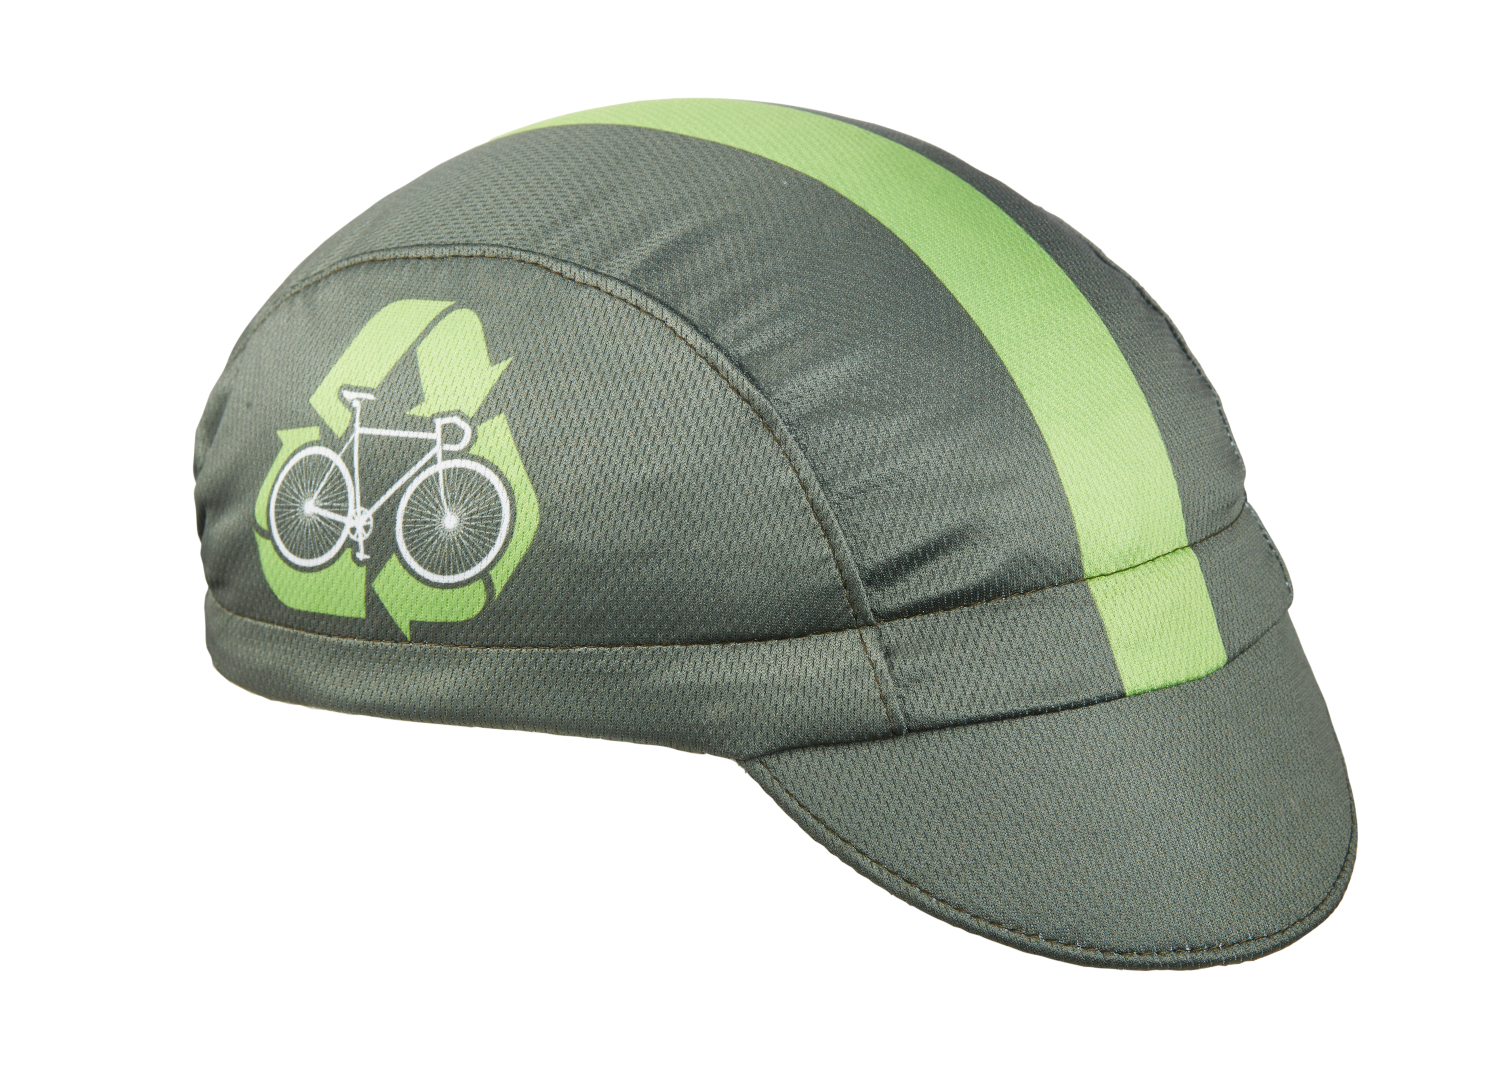 "We-Cycle" Technical 3-Panel Cap.  Olive green cap with light green stripe and bicycle re-cycle icon.  Angled view.